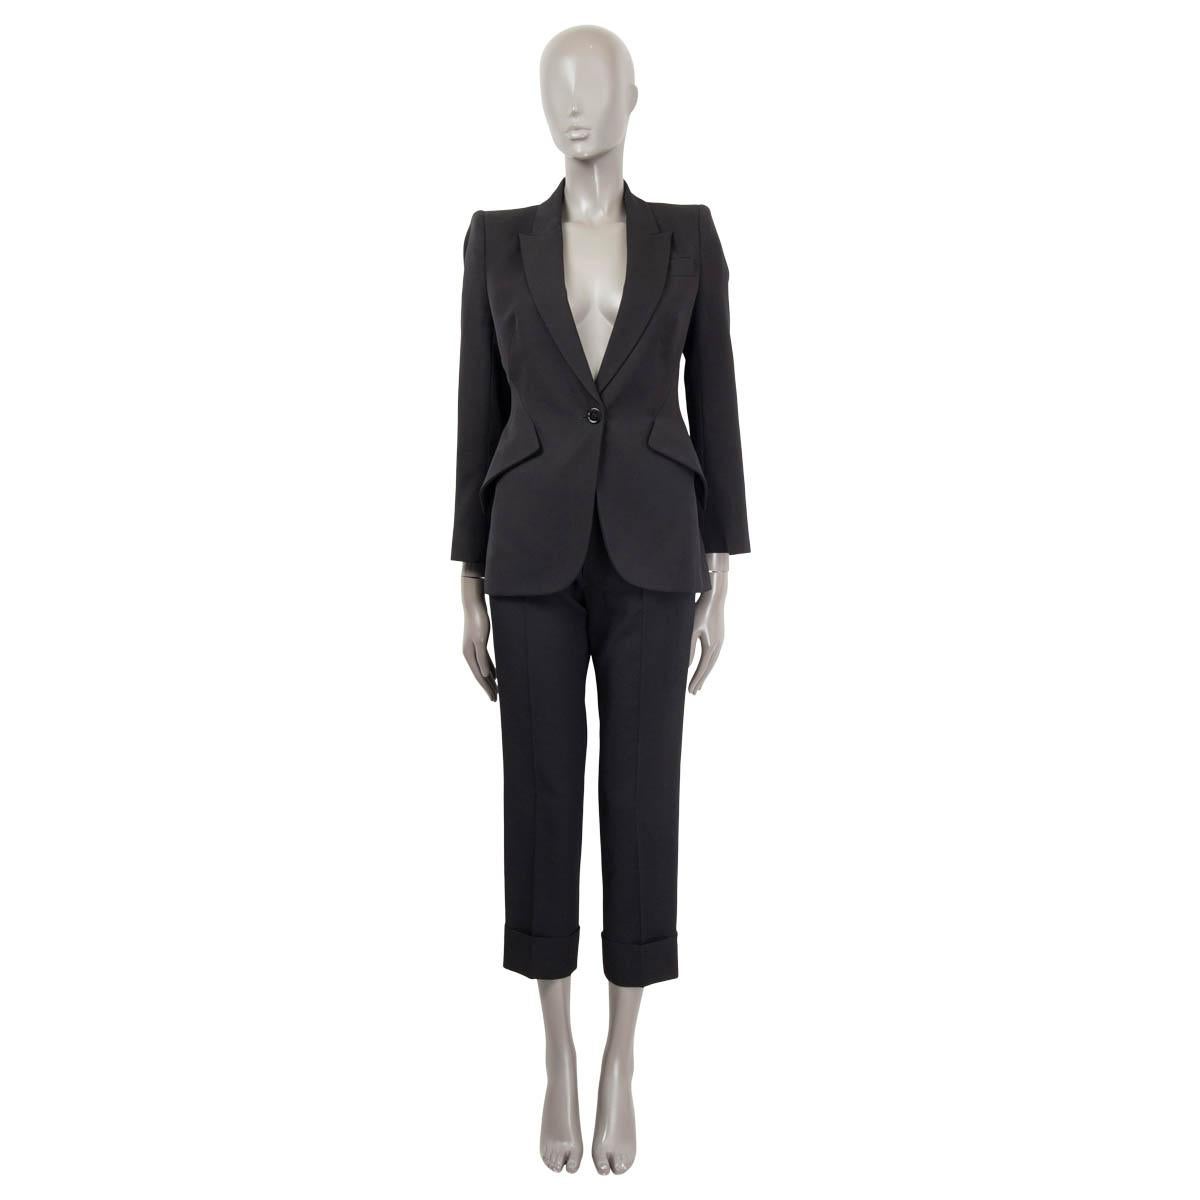 100% authentic Alexander McQueen notch collar blazer in structured black virgin wool (100%). Features slits at the back, a chest pocket, two diagonal flap pockets in the front and a tailored cut. Opens with one black button on the front. Double